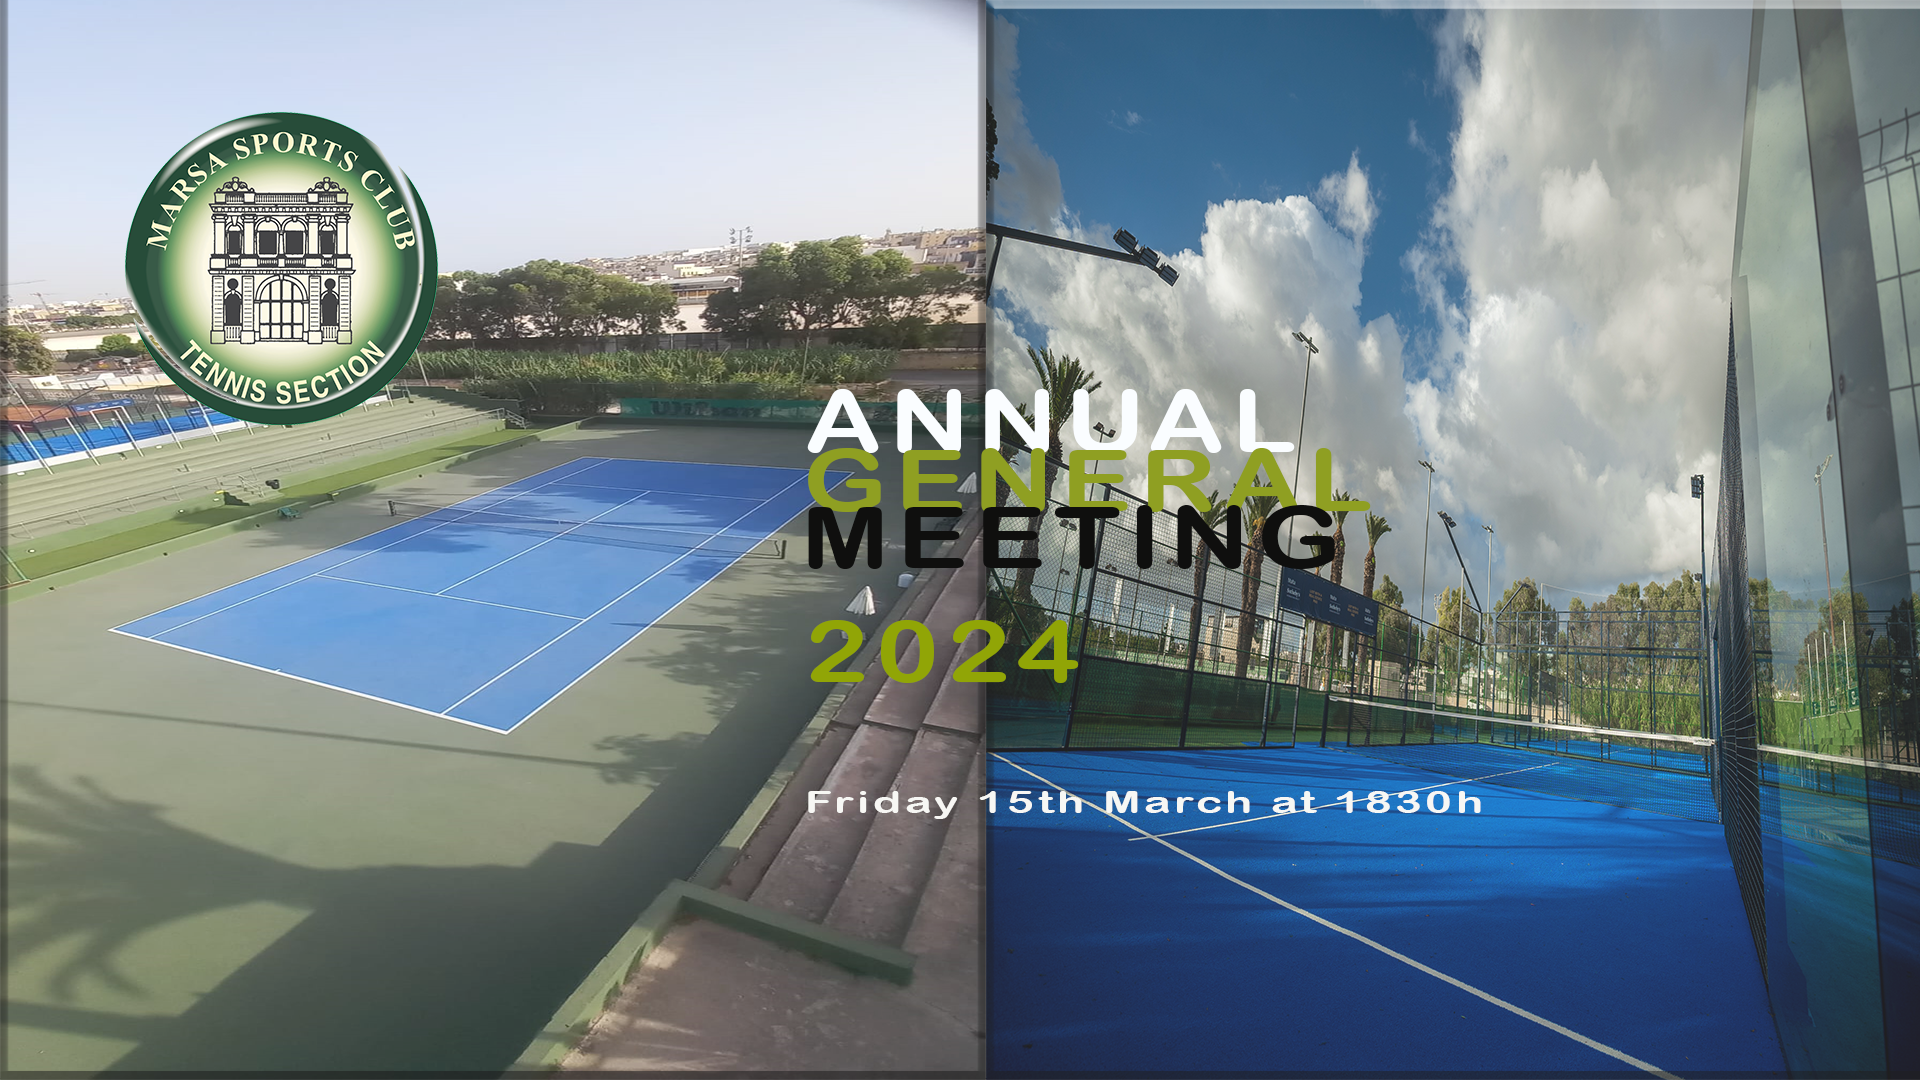 Tennis\Padel Section Annual General Meeting